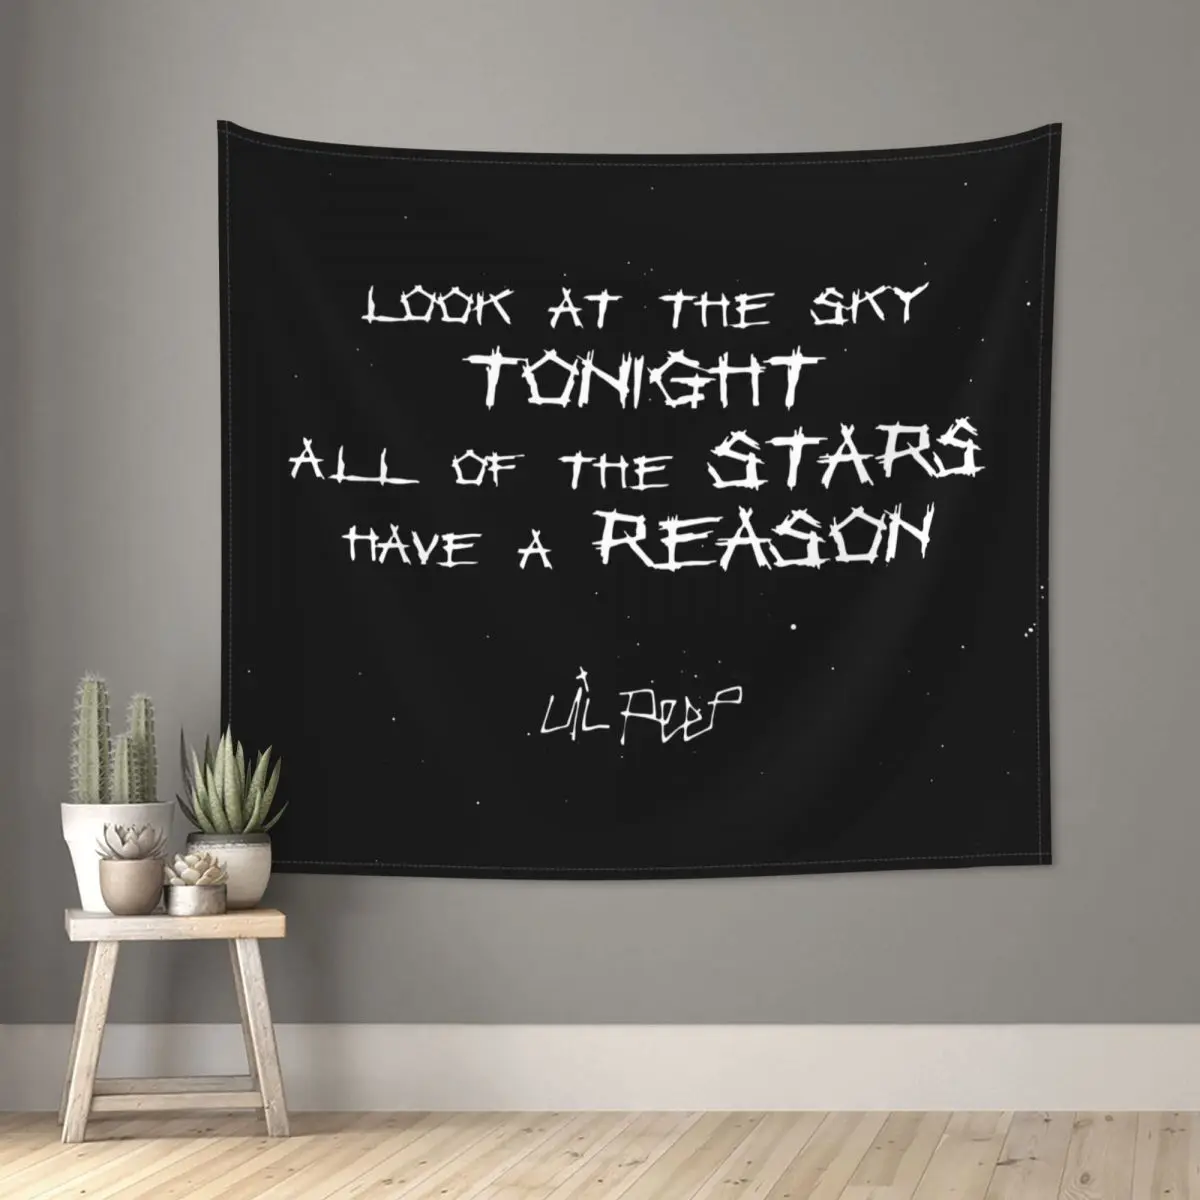 

Lil Peep Star Shopping Lyrics Starry Background Tapestry Wall Hanging Hippie Tapestry INS Throw Rug Blanket Wall Decor 95x73cm